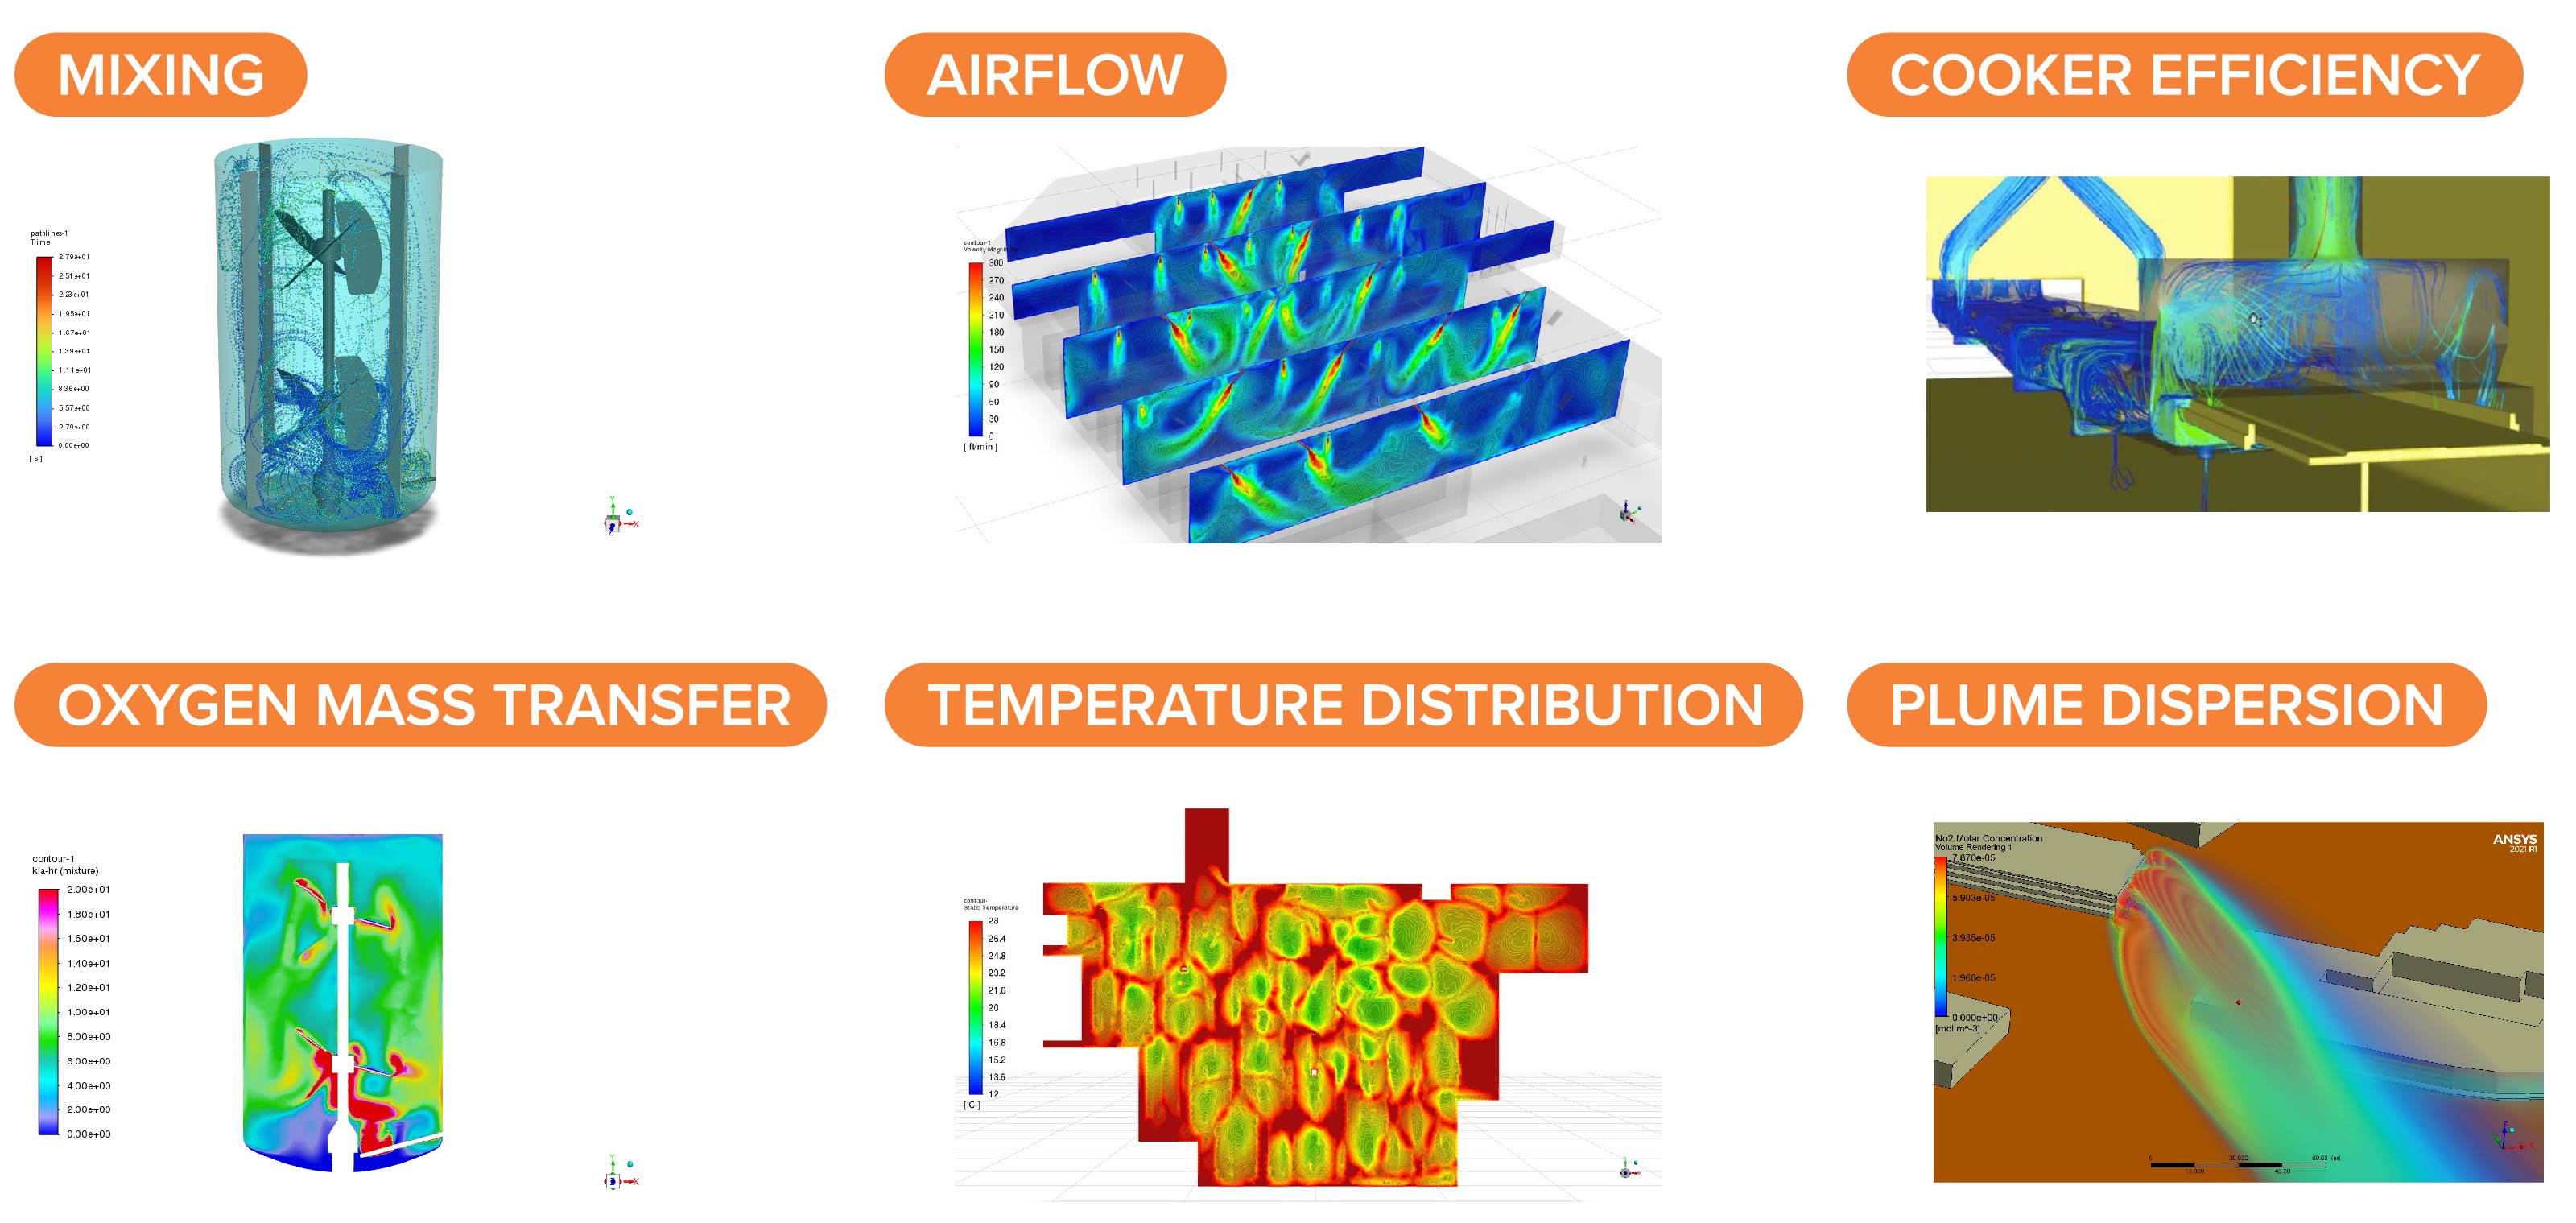 6 uses of CFD modeling in warehouses and manufacturing